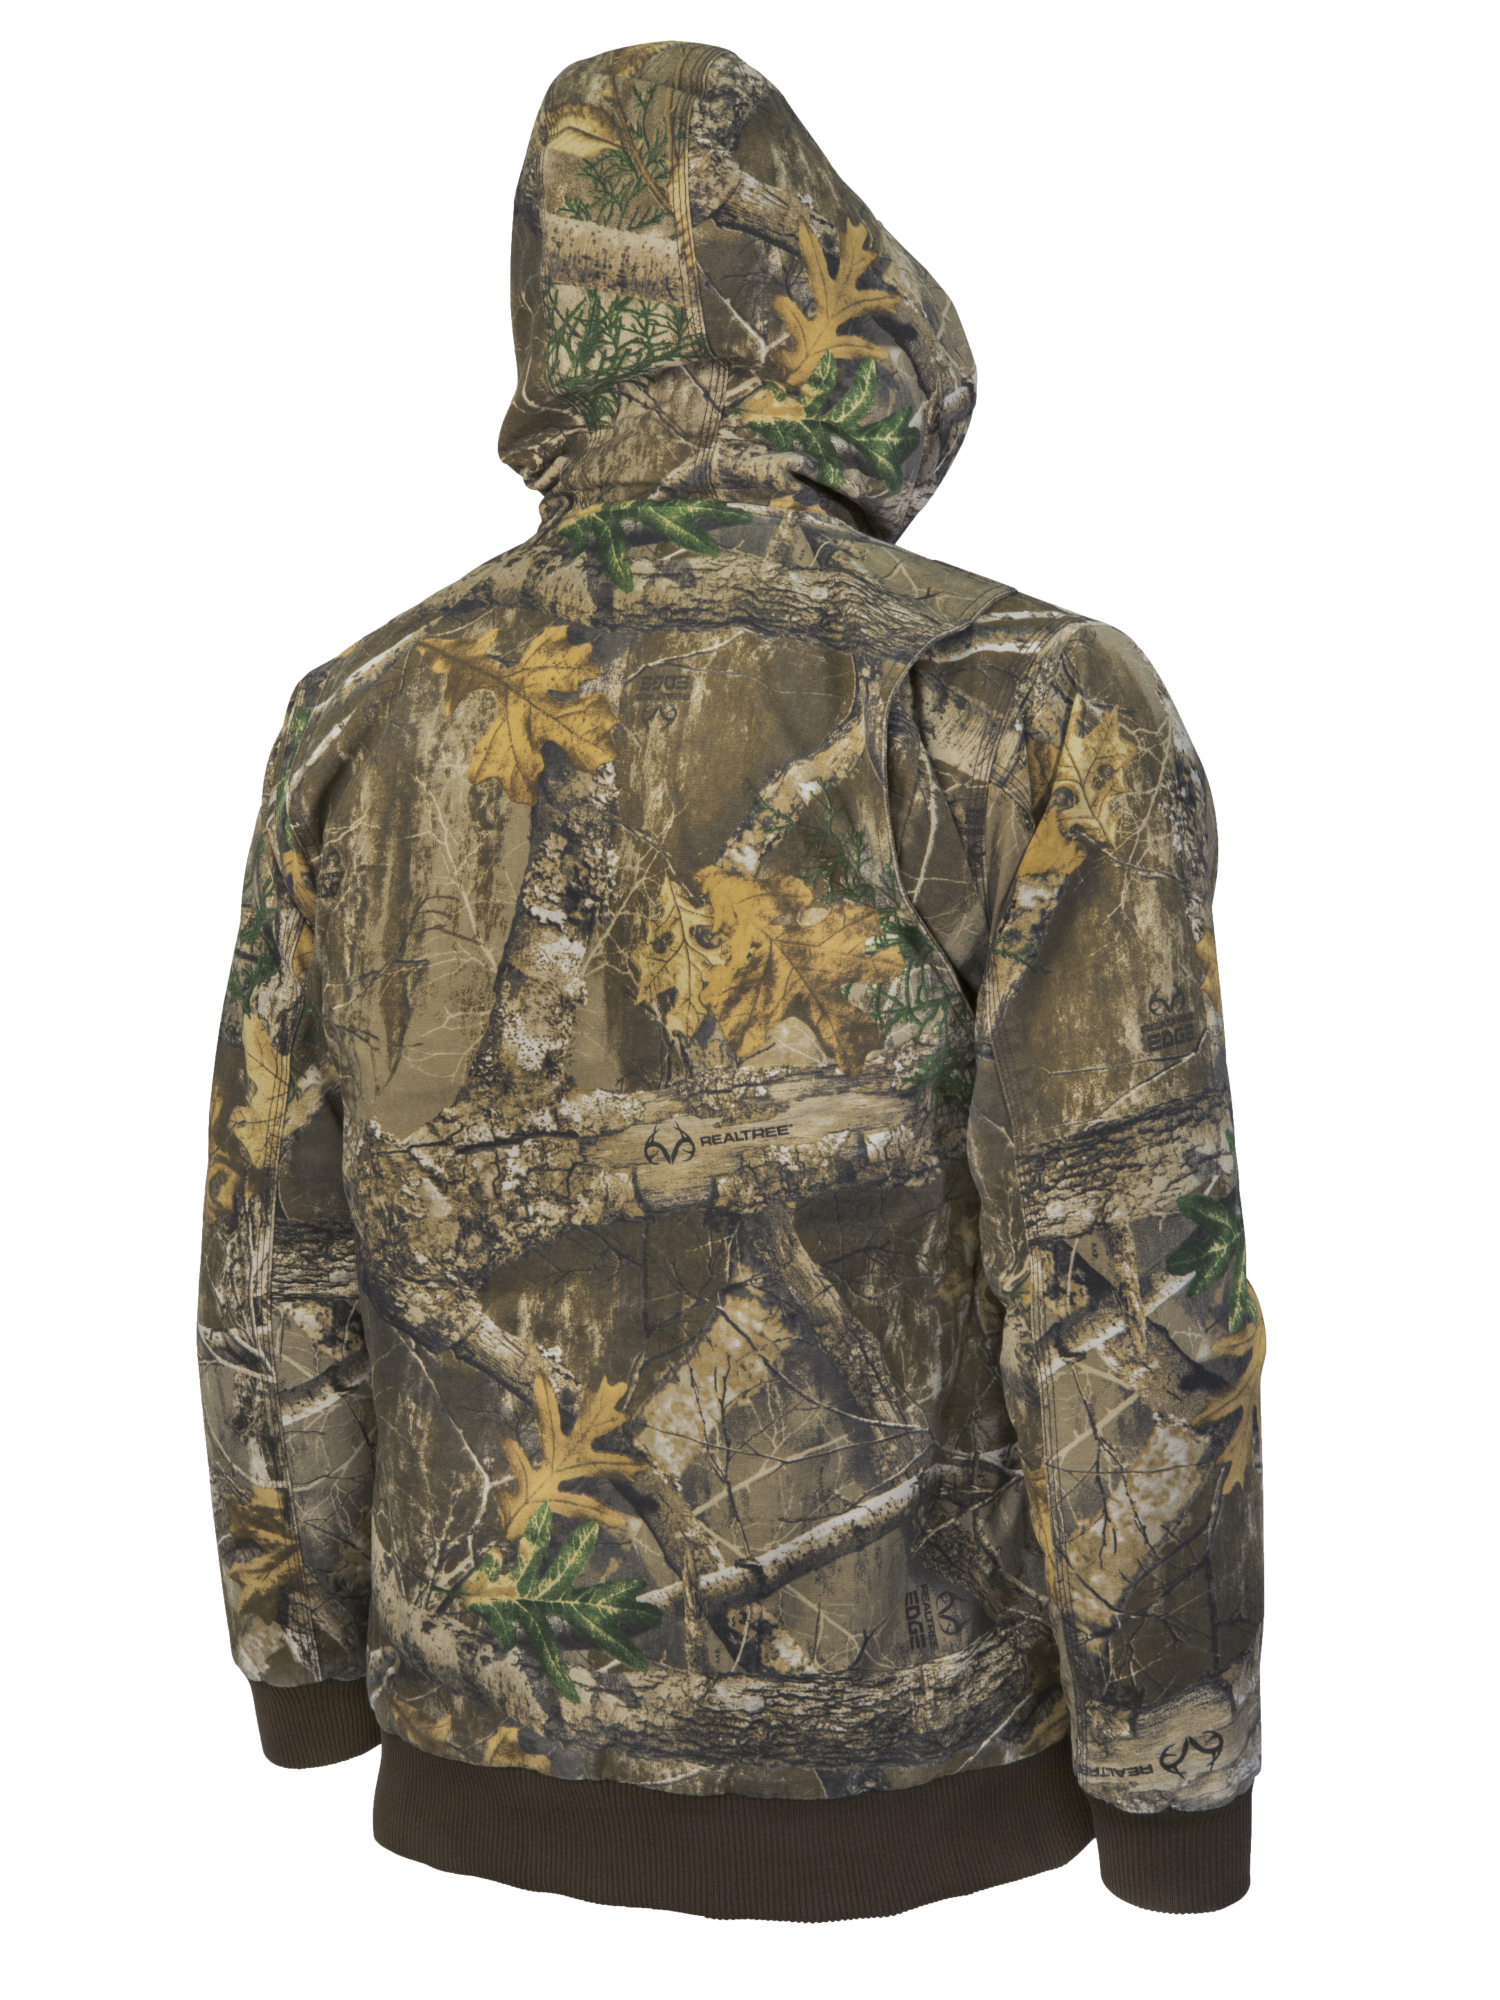 Realtree Insulated Camo Bomber Jacket by Hyde Gear Heavy Weight ...